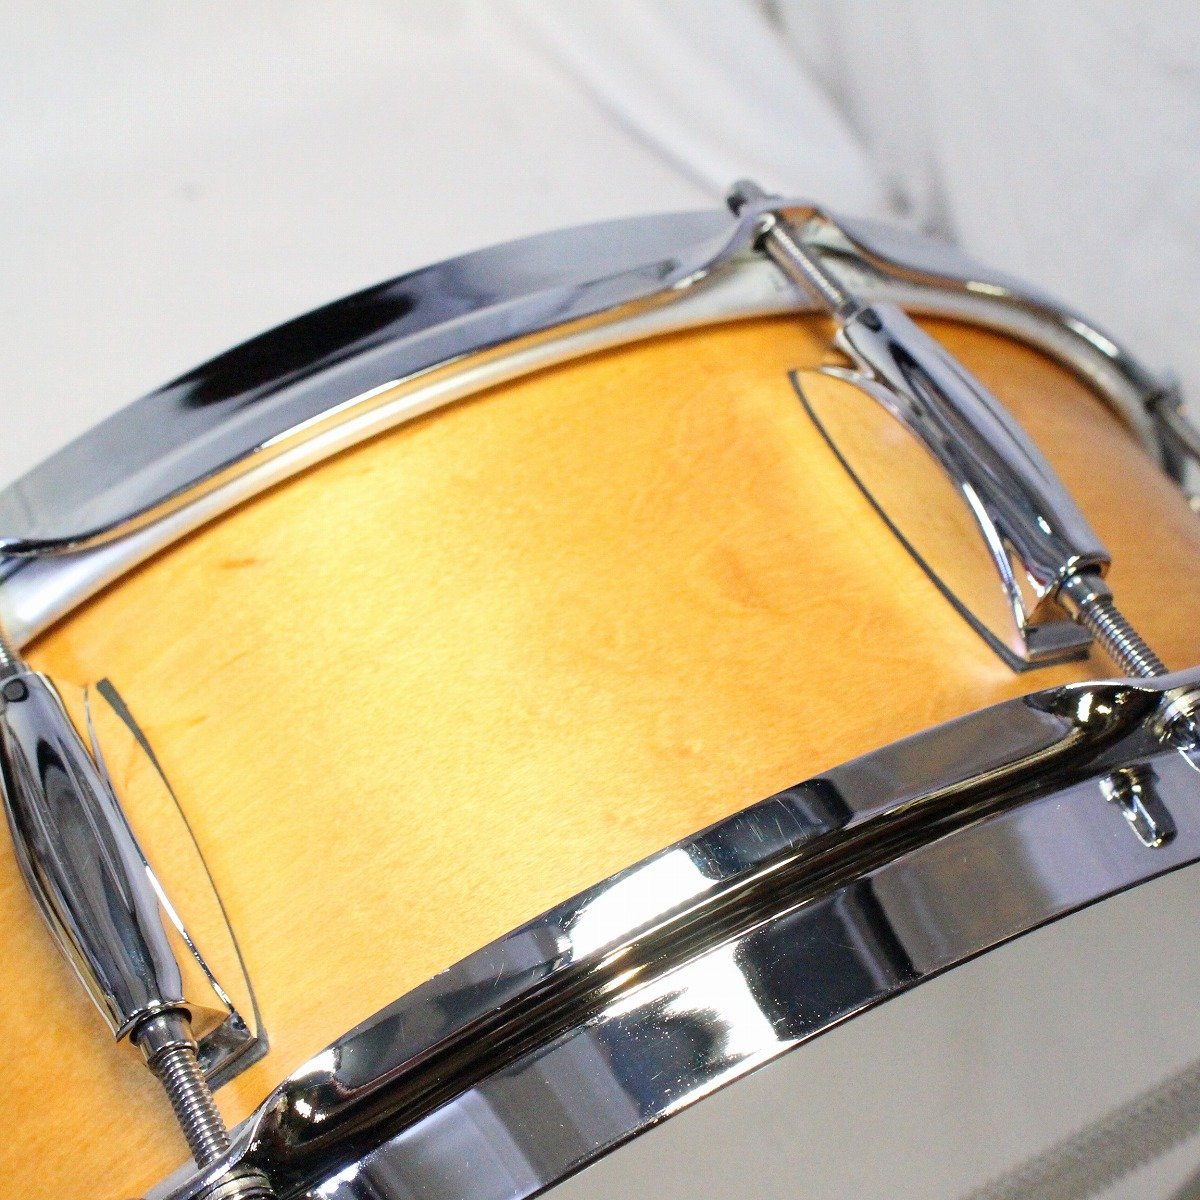 USED GRETSCH / GKSL-0514S-8CL Broadcaster Snare 14×5 Gretsch Broadcaster Snare Drum [08]